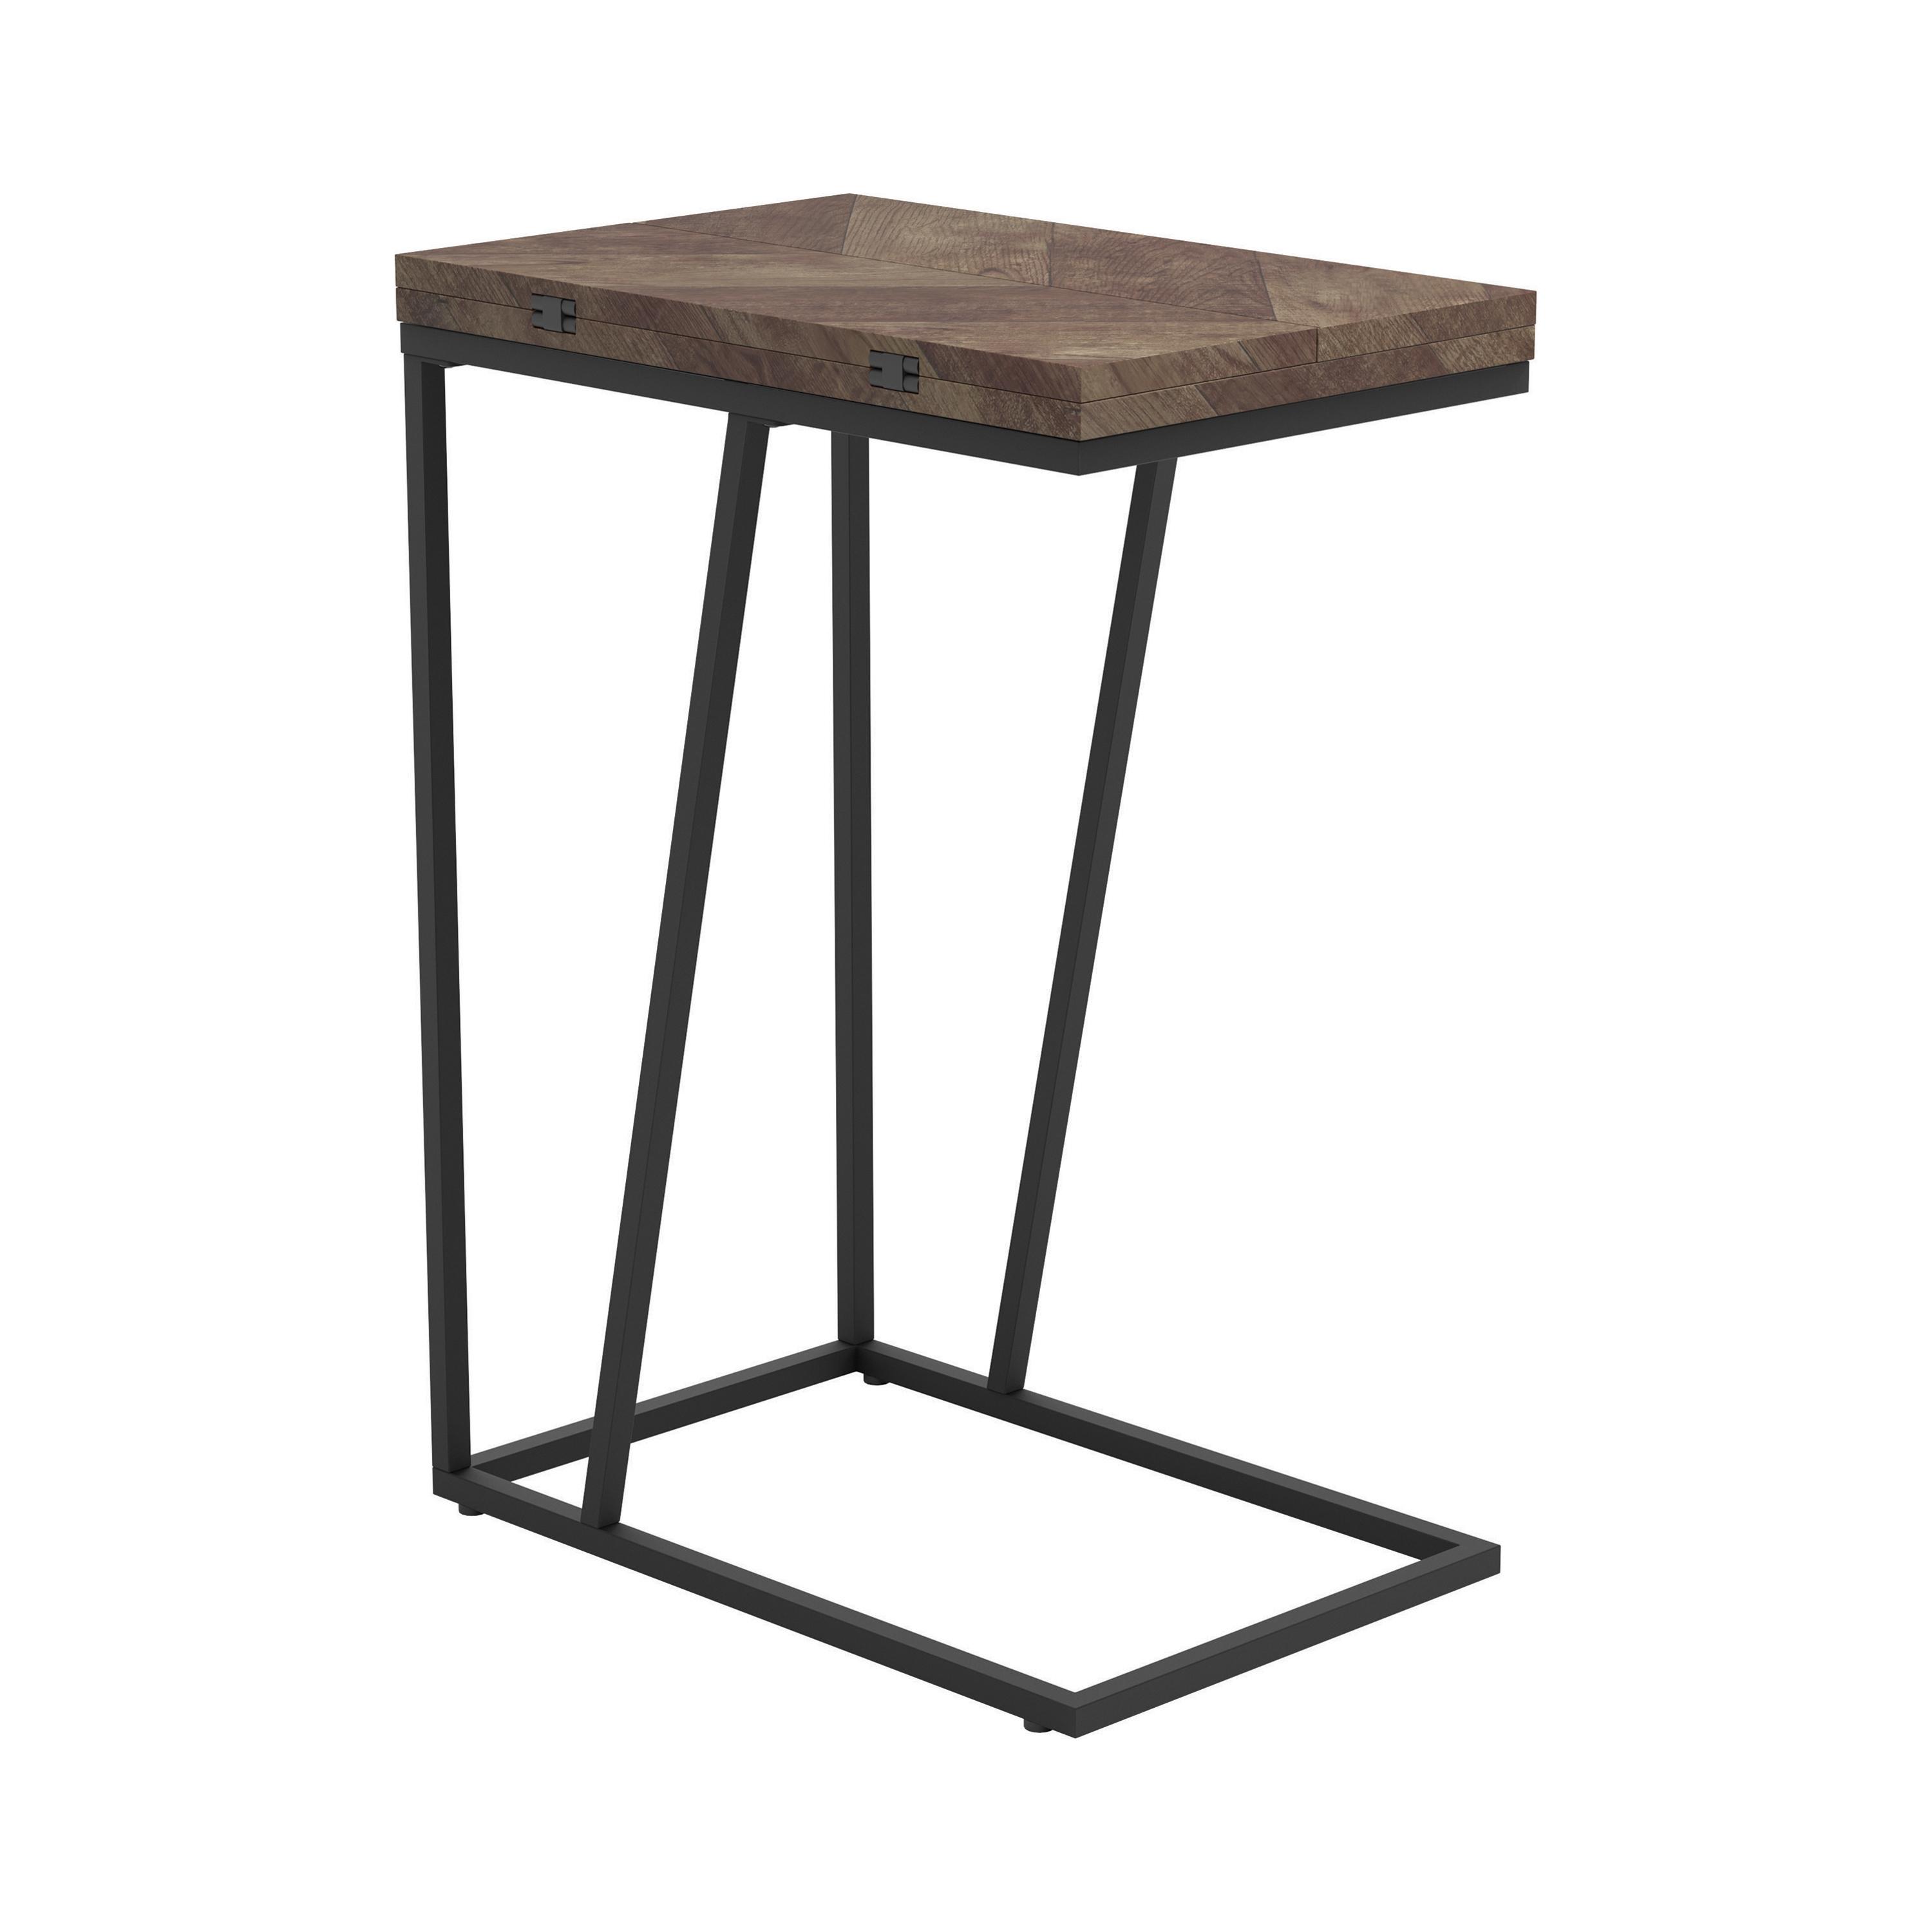 Modern Accent Table 931157 931157 in Tobacco 